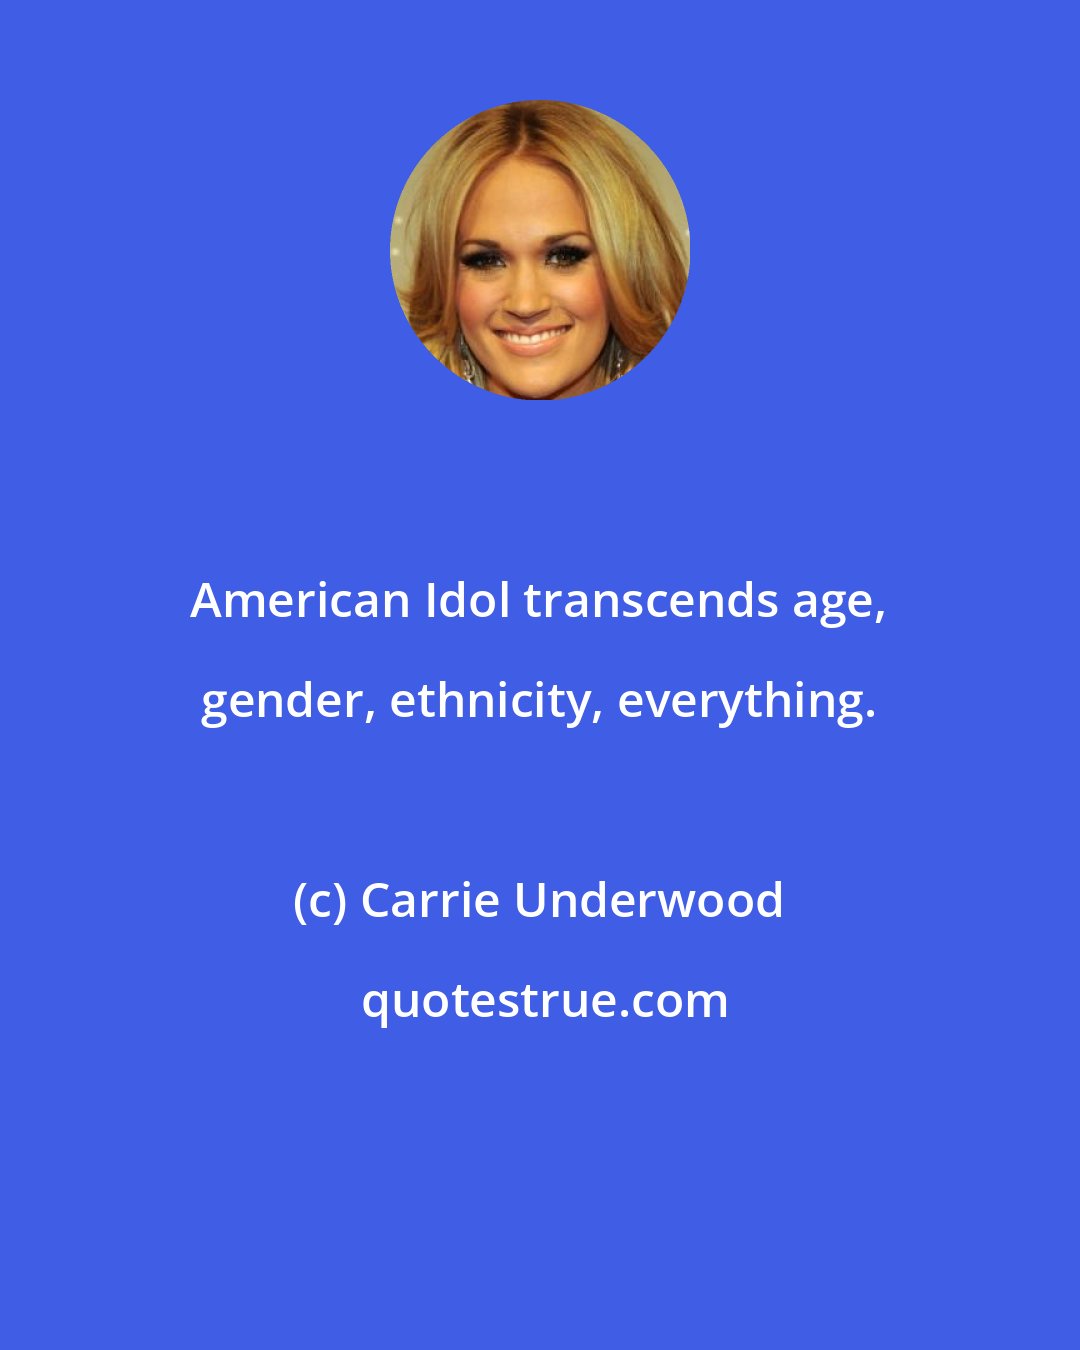 Carrie Underwood: American Idol transcends age, gender, ethnicity, everything.